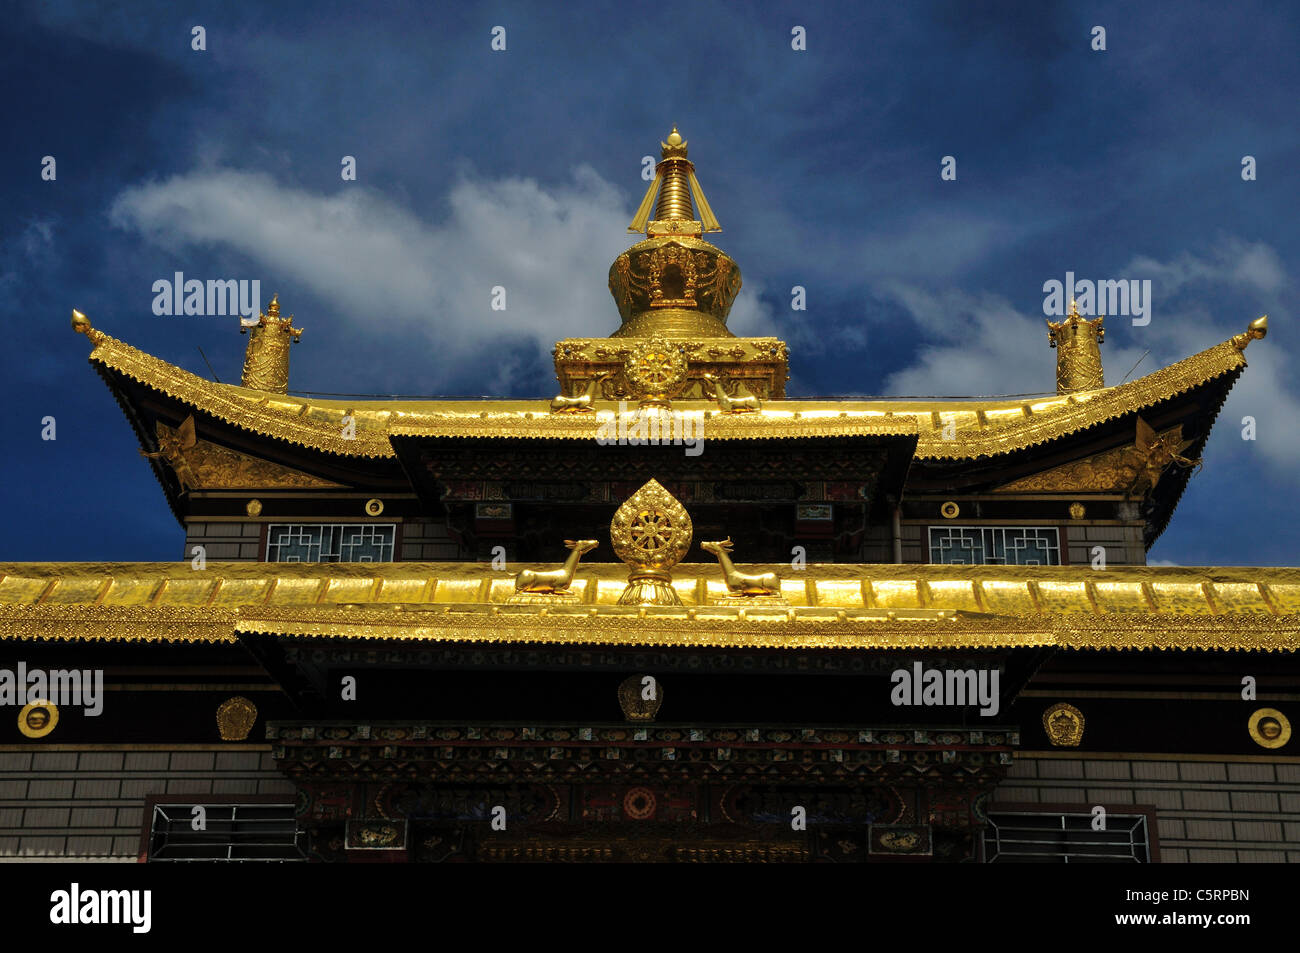 The golden roof of a Tibetan Buddhist temple. Tagong, Sichuan, China. Stock Photo